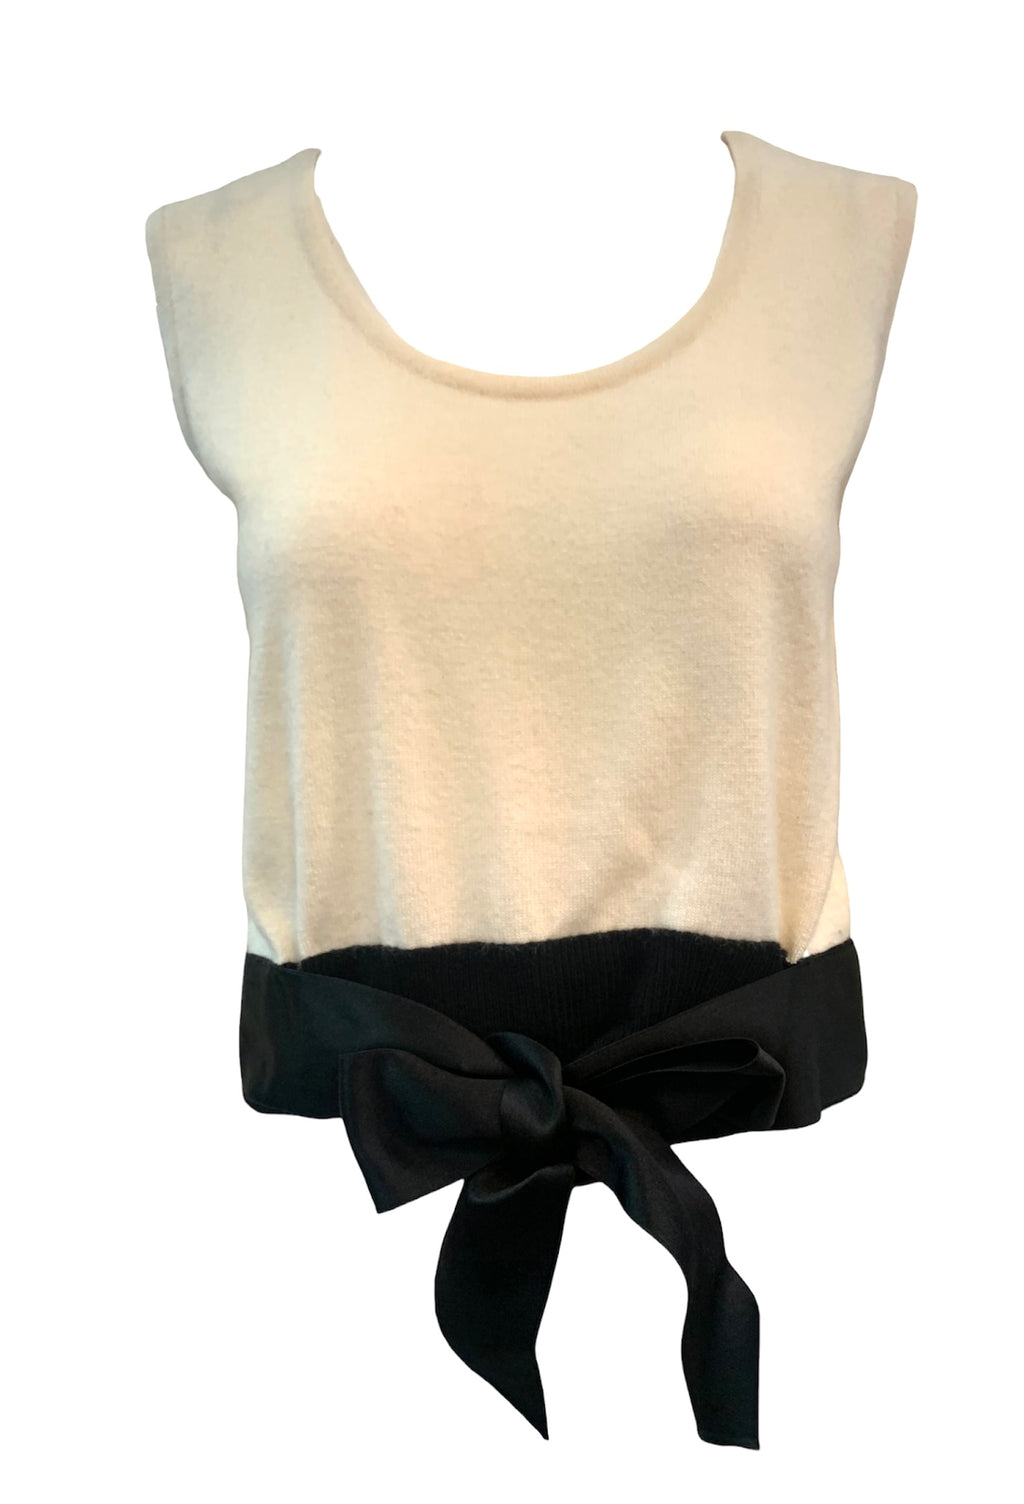 Chanel Y2K Two Tone Ivory Tank Style Sweater with Black Satin Waist Tie